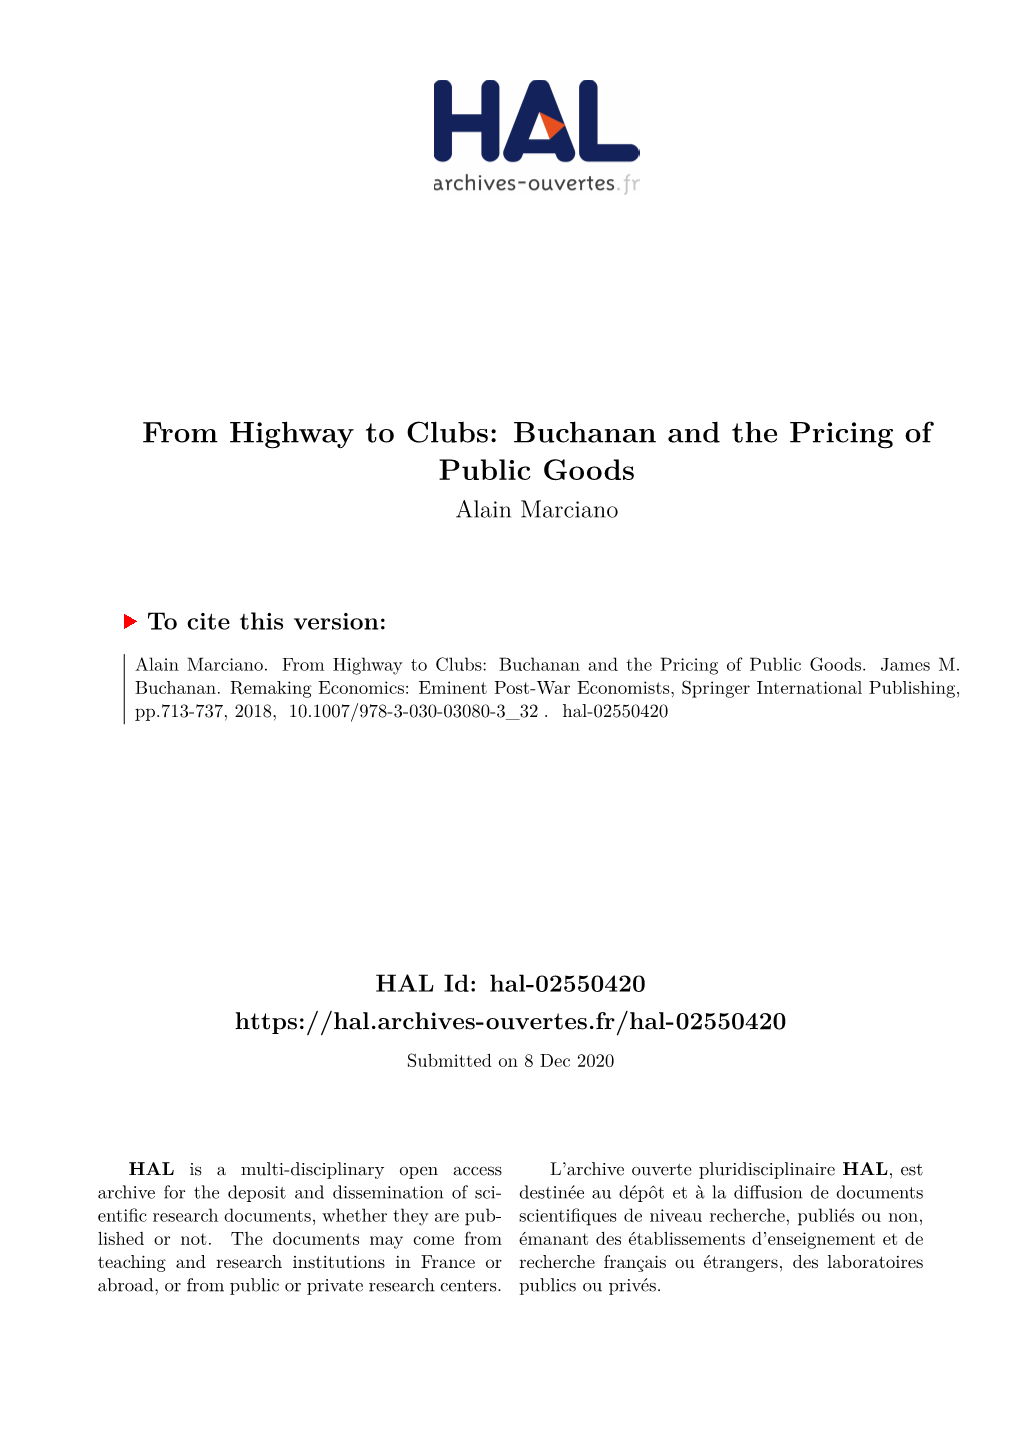 From Highway to Clubs: Buchanan and the Pricing of Public Goods Alain Marciano